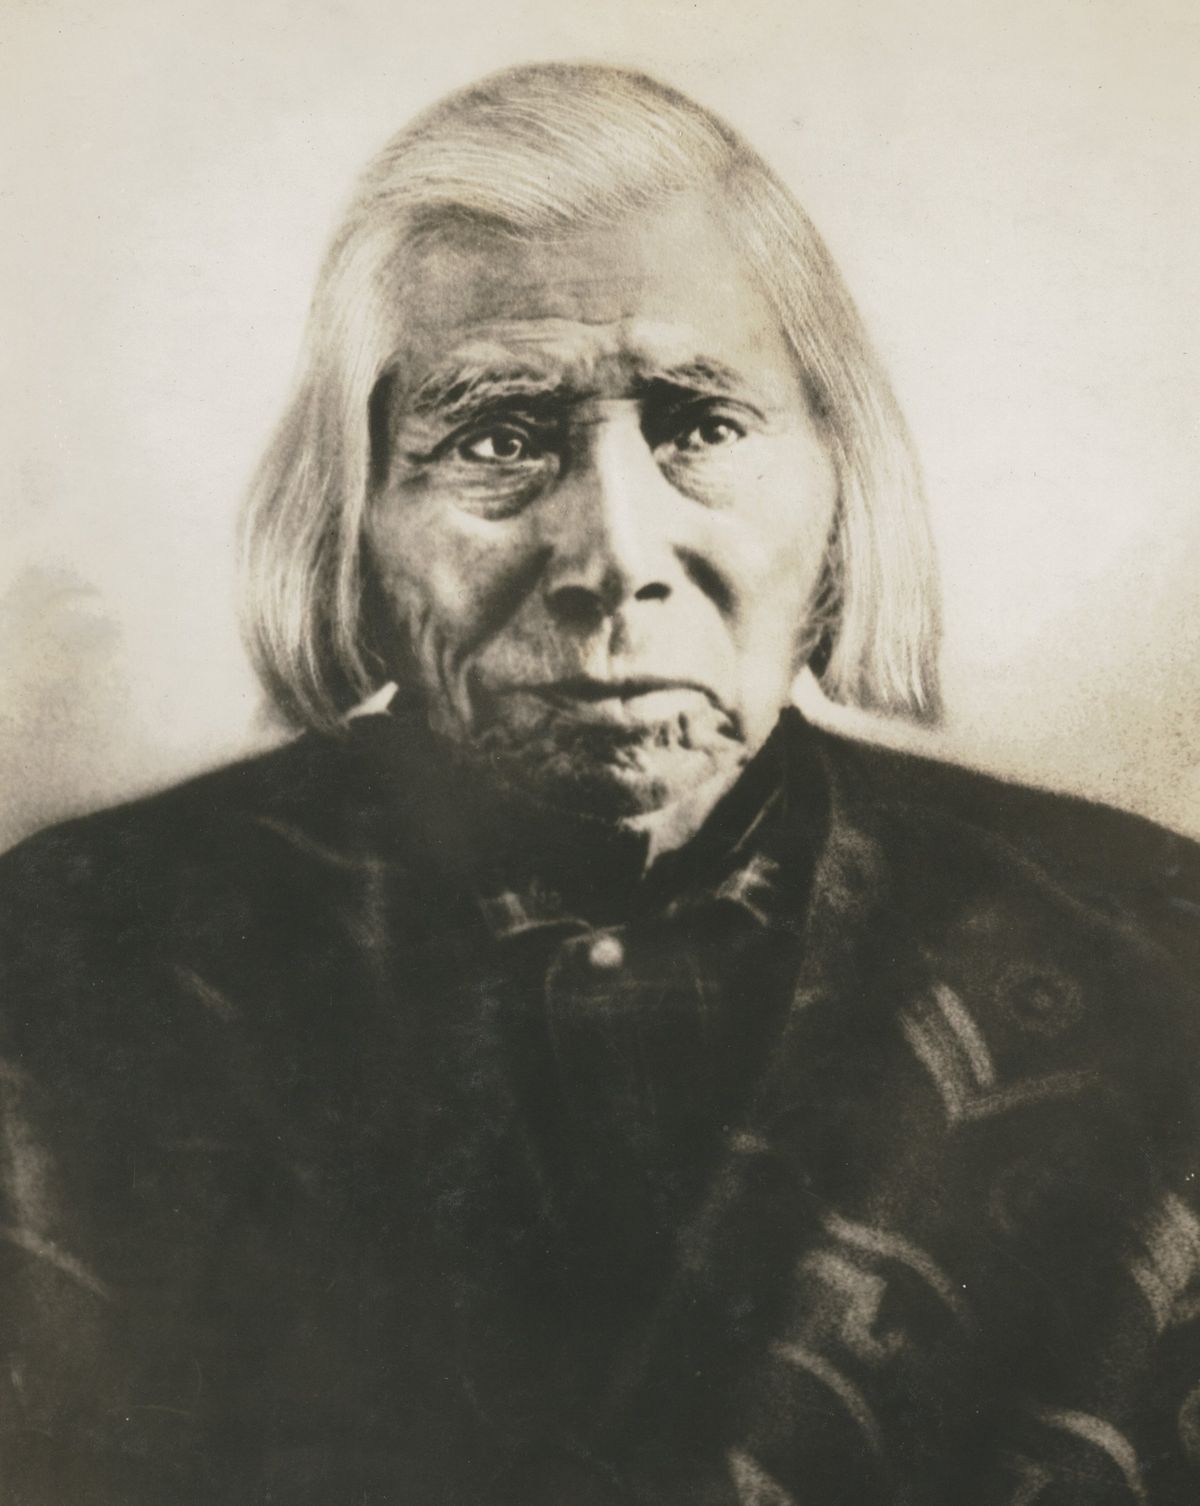 A portrait Chief Garry, a chief of the Spokane tribe, in his old age.  (Courtesy of Northwest Museum of Arts and Culture/Eastern Washington State Historical Society)